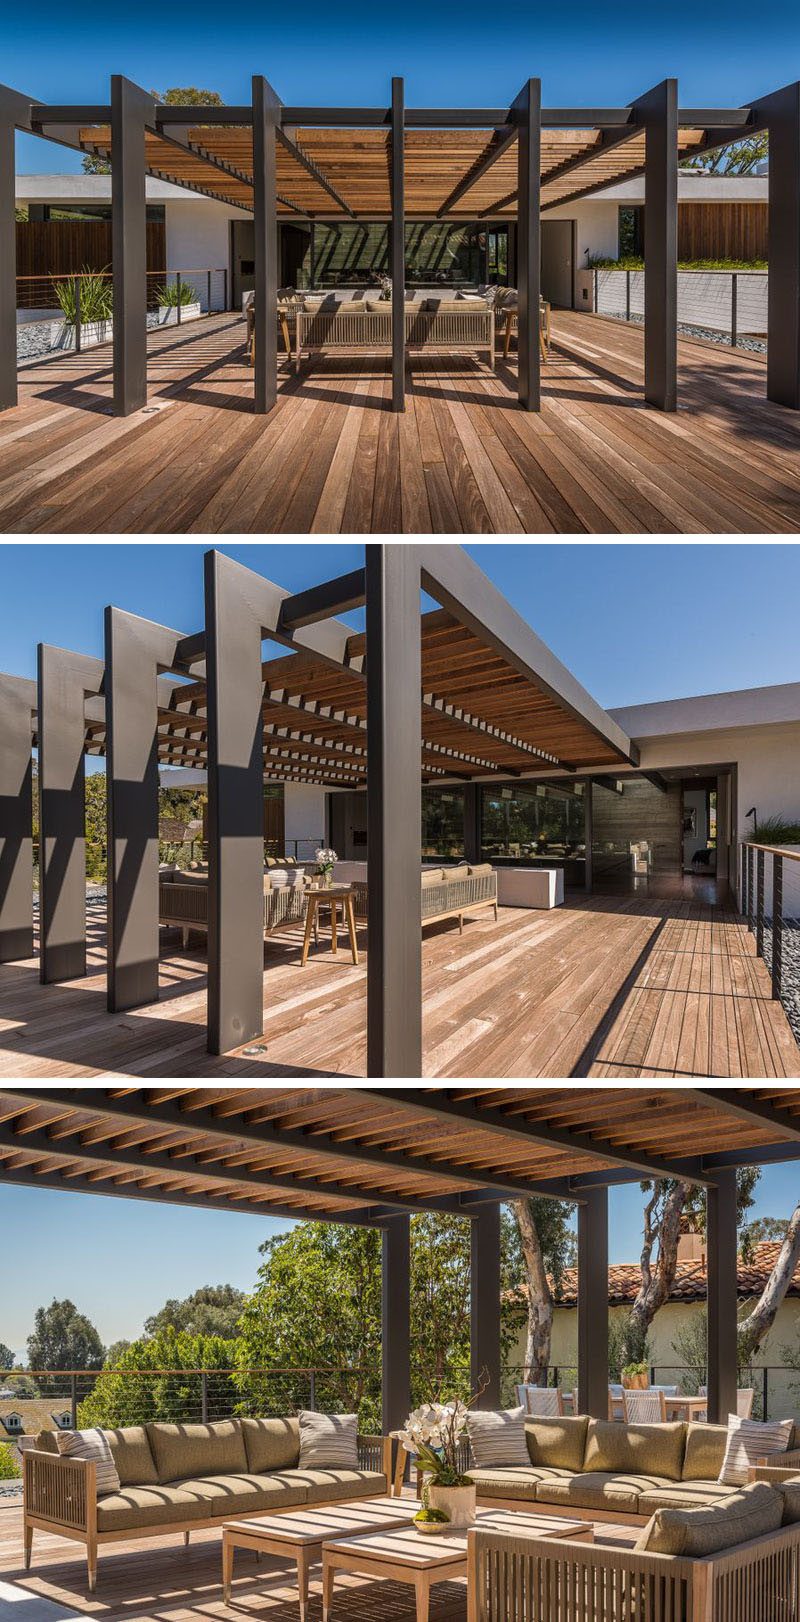 This large pergola has enough space for a large outdoor lounge and dining area.